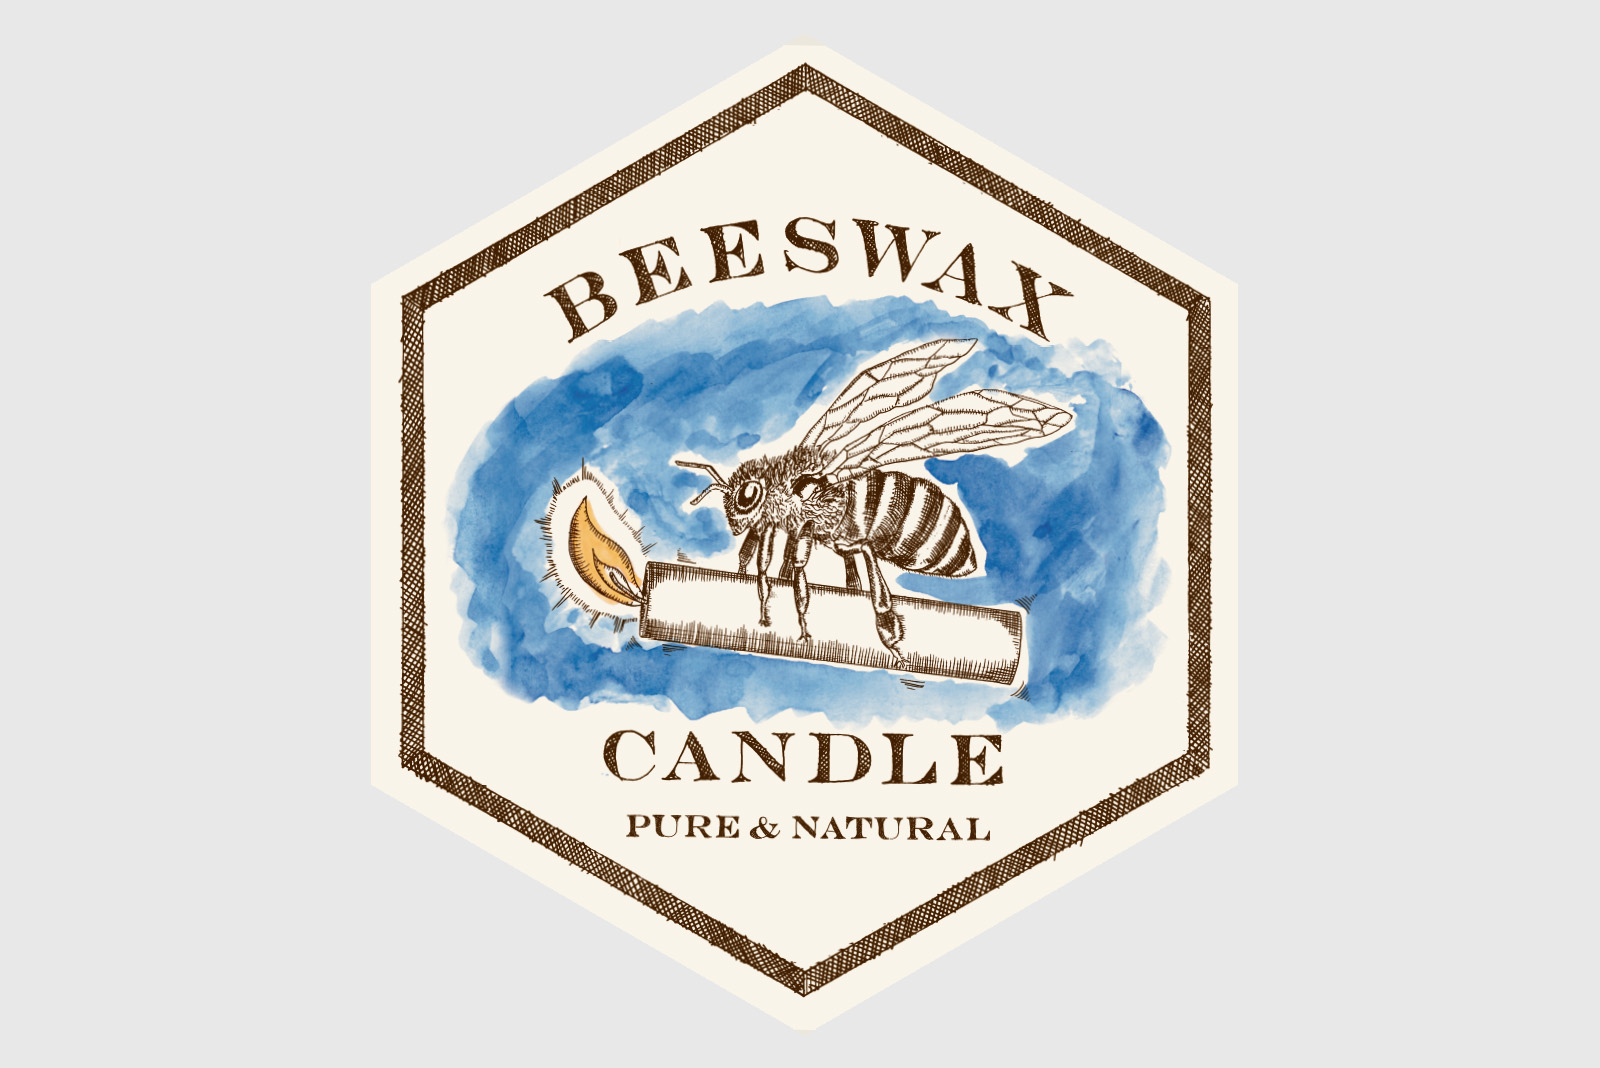 beeswax-candle_2